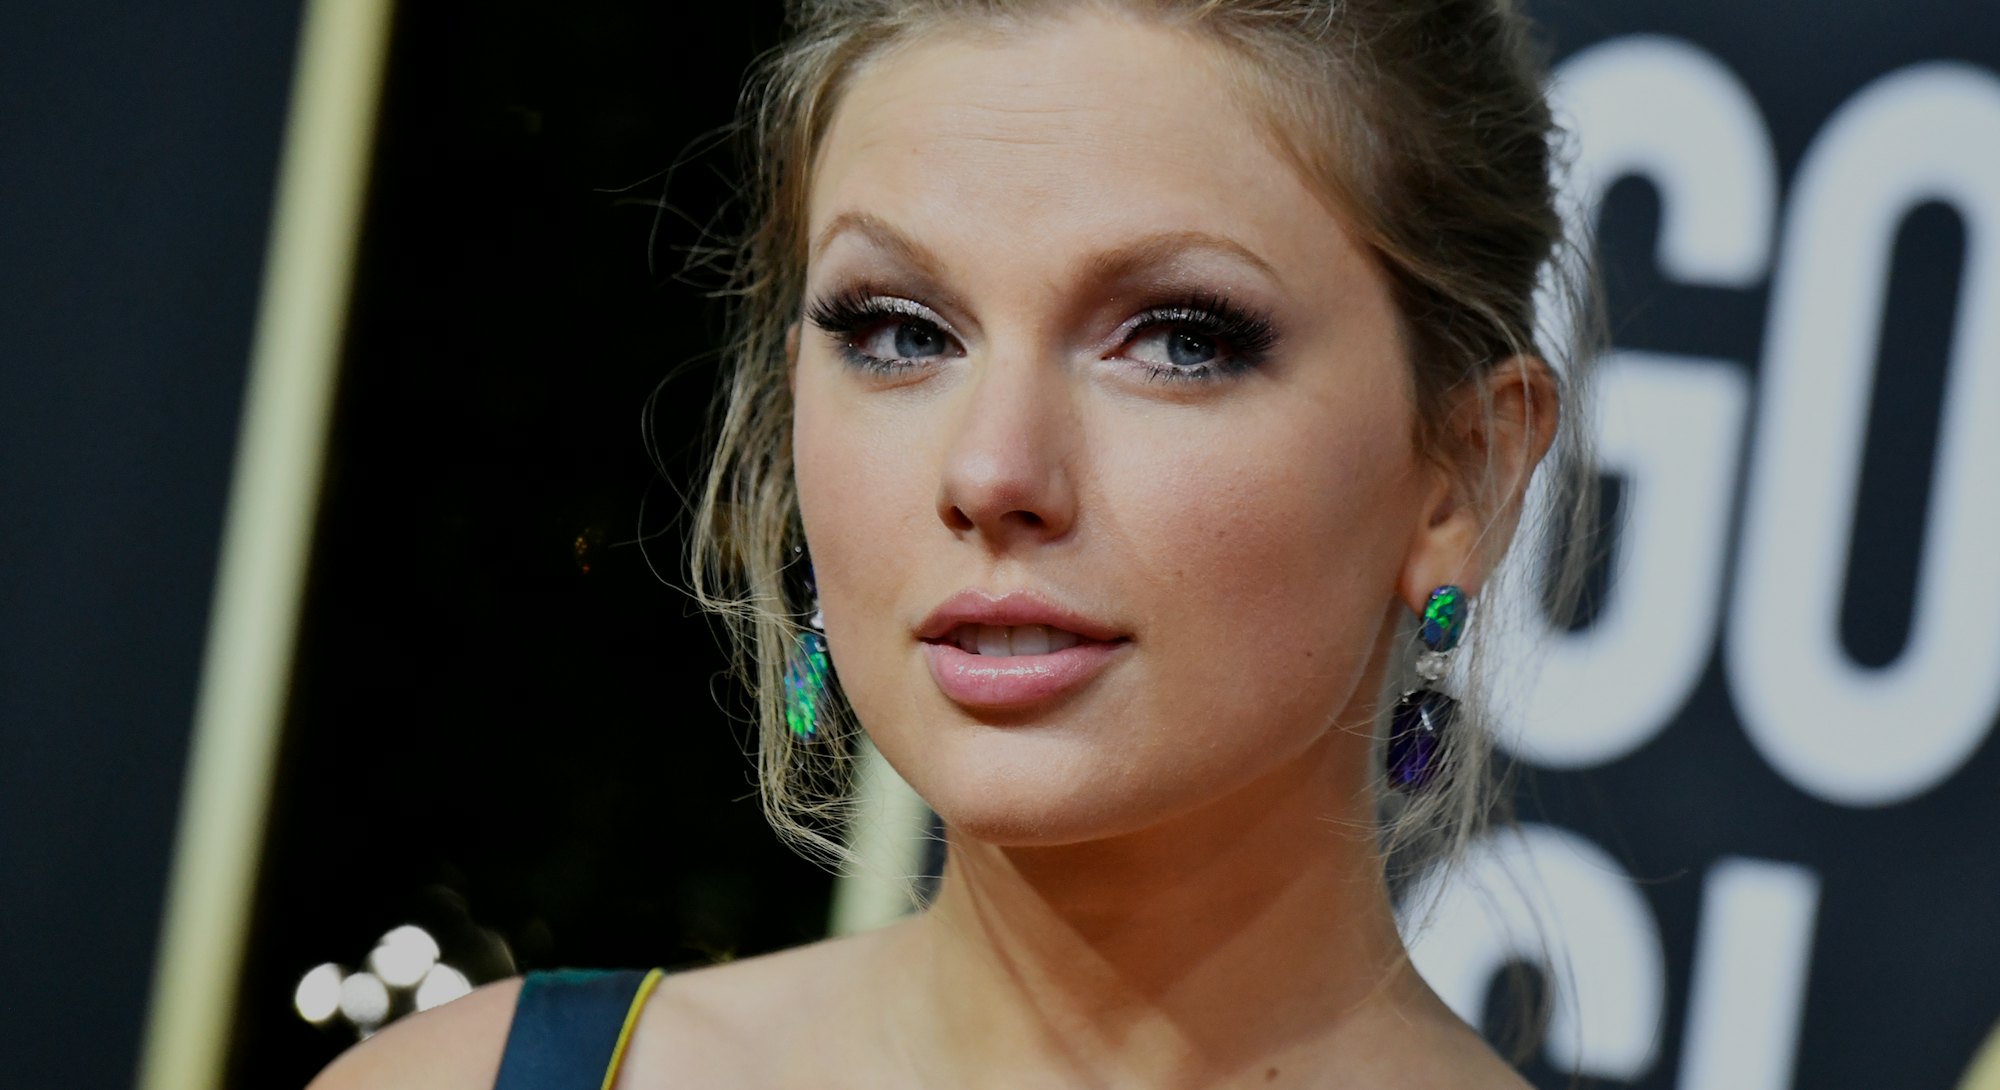 BEVERLY HILLS, CALIFORNIA - JANUARY 05: Taylor Swift attends the 77th Annual Golden Globe Awards at ...